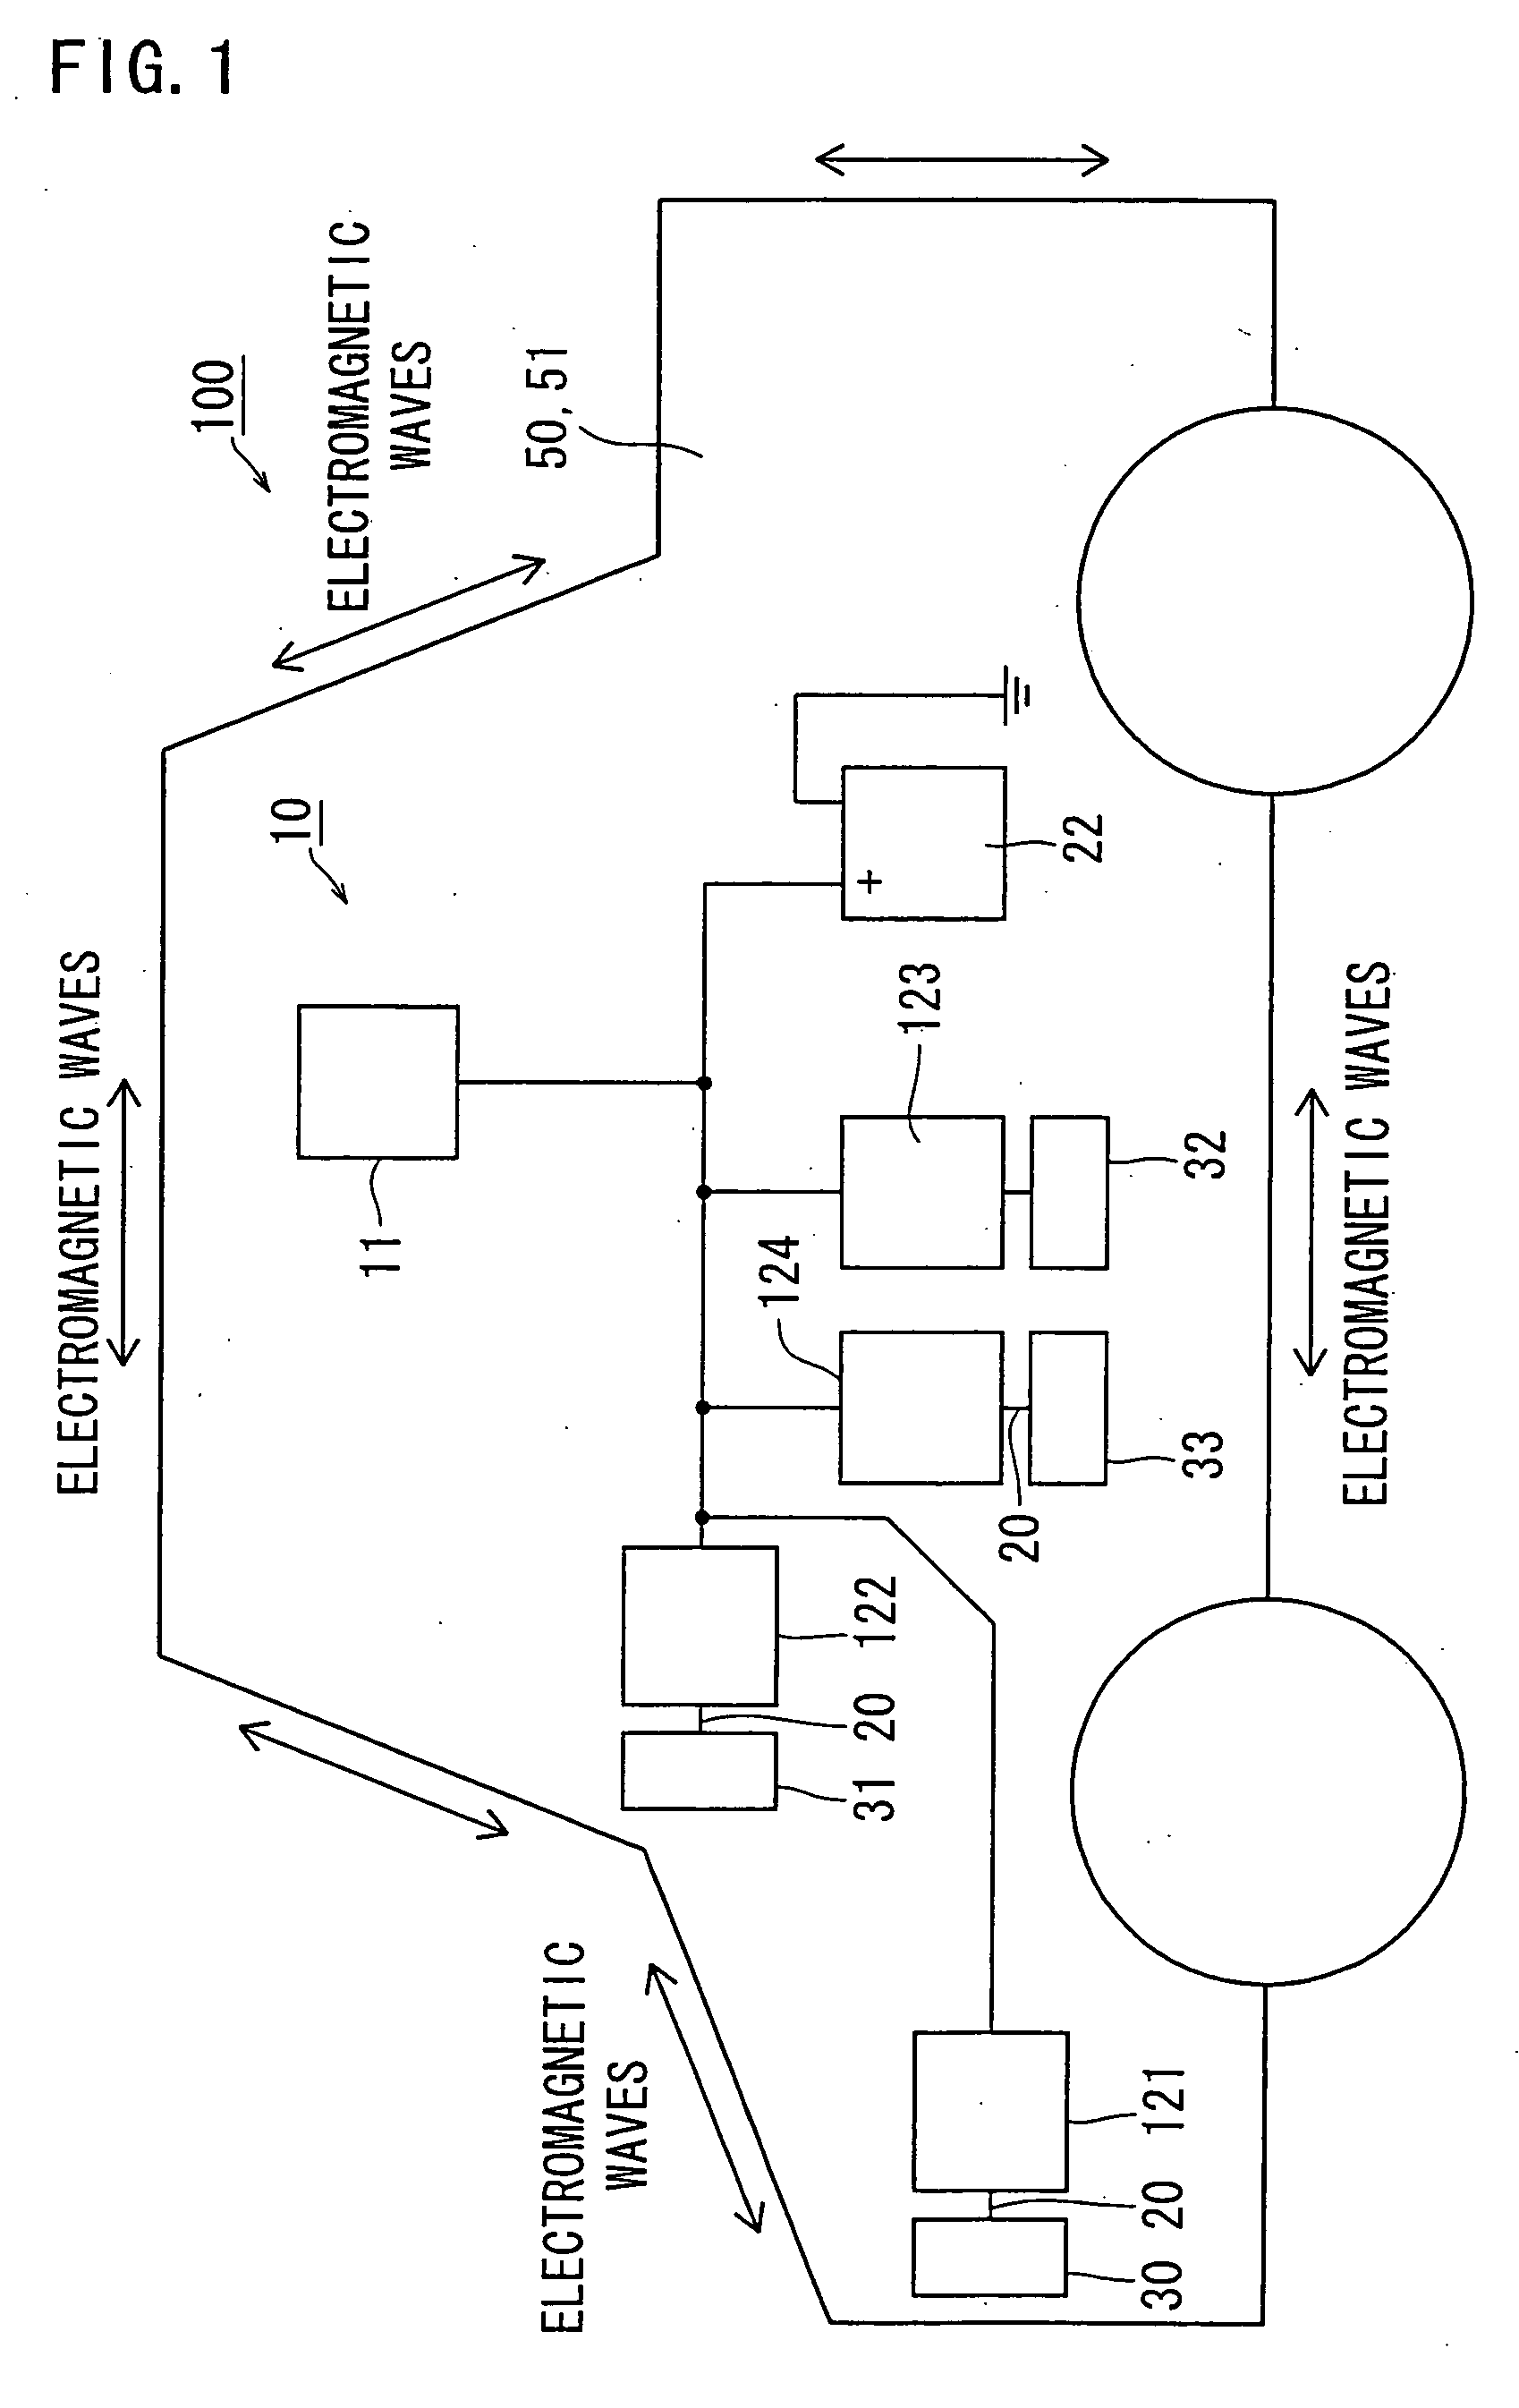 Vehicle appliance control system